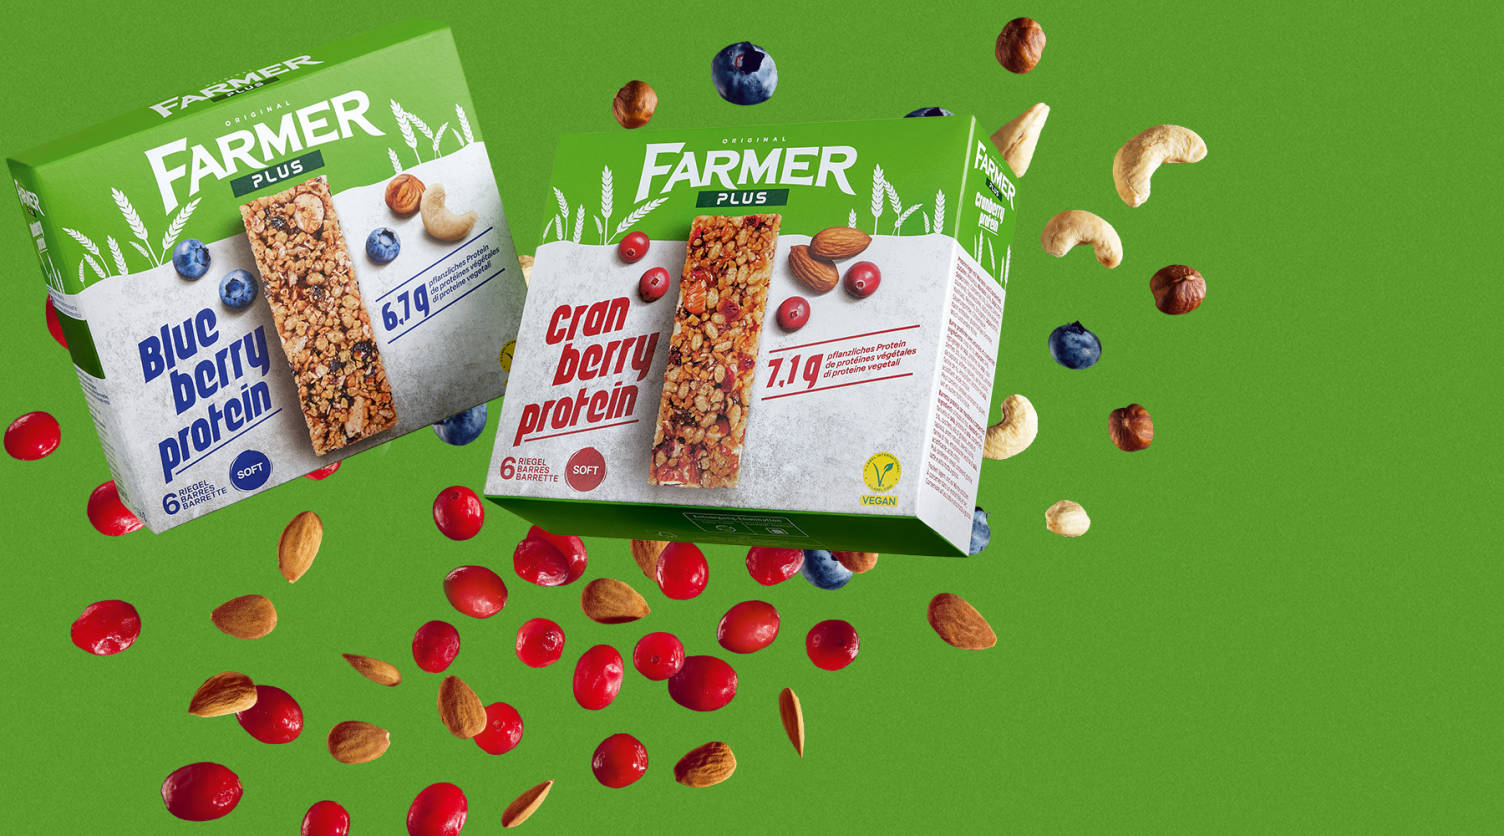 A product image with different berries and nuts